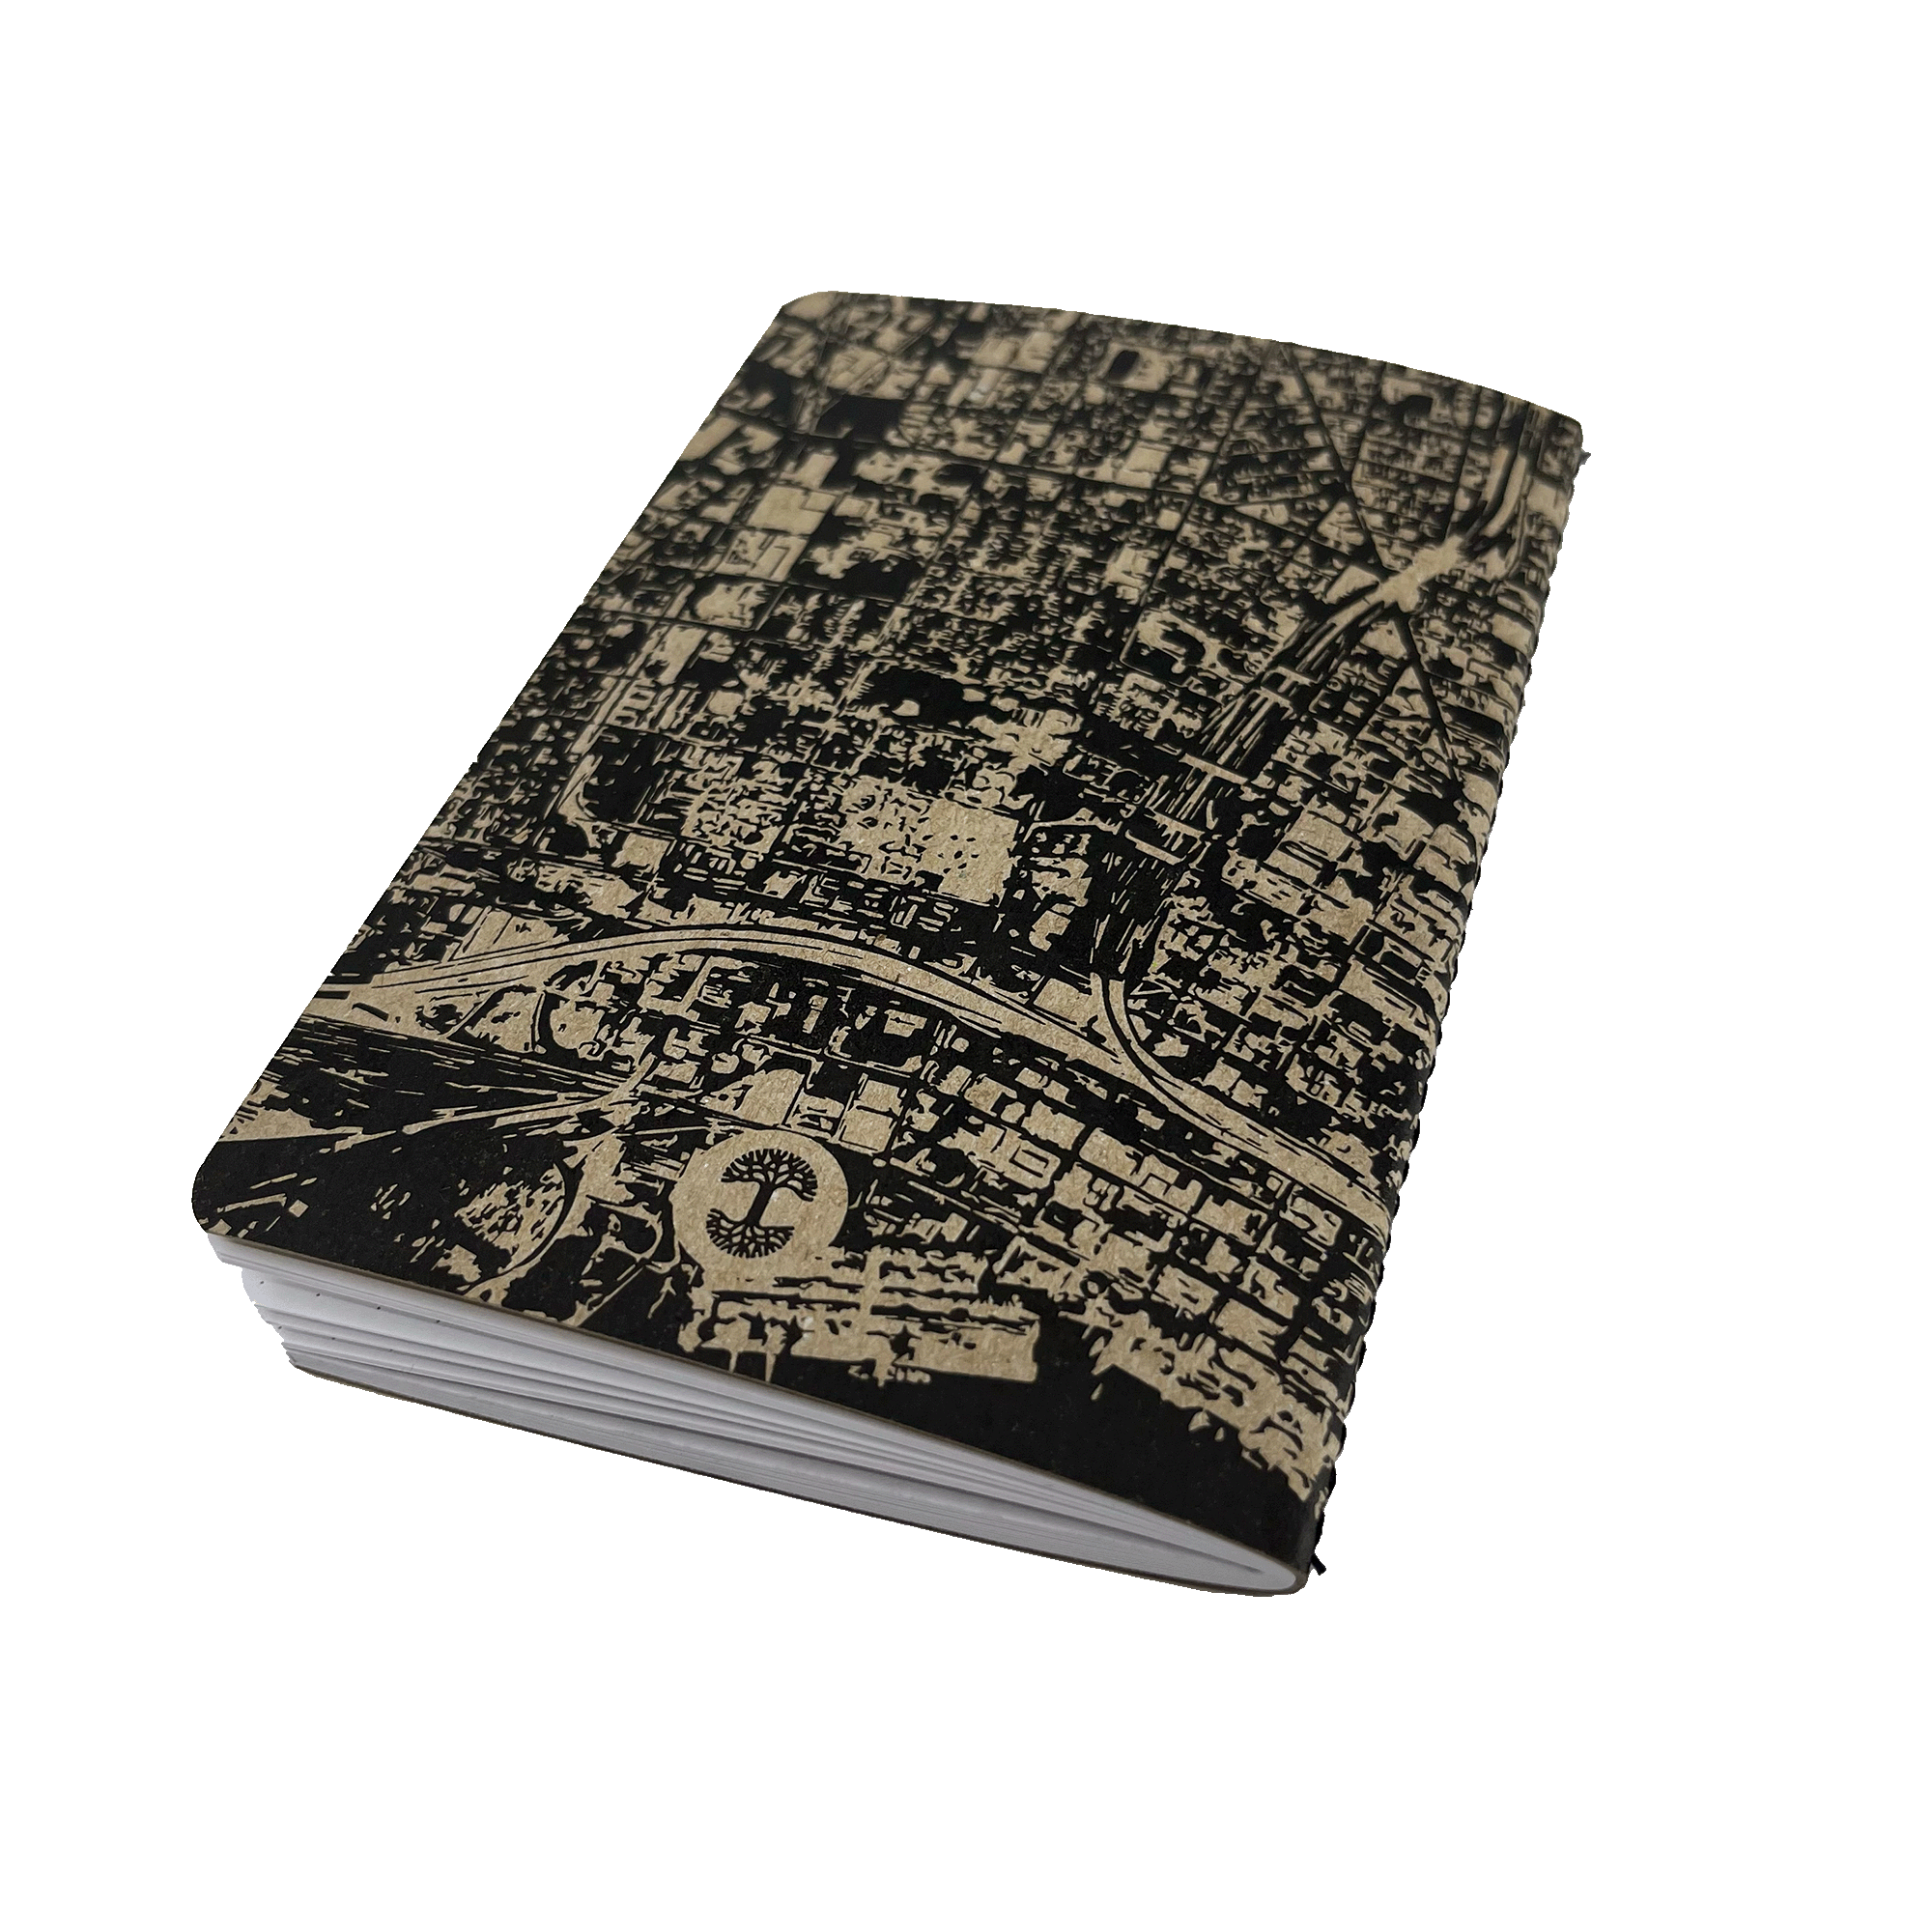 Backside view of mini notebook with aerial map view of Oakland and Oaklandish tree logo on the cover.